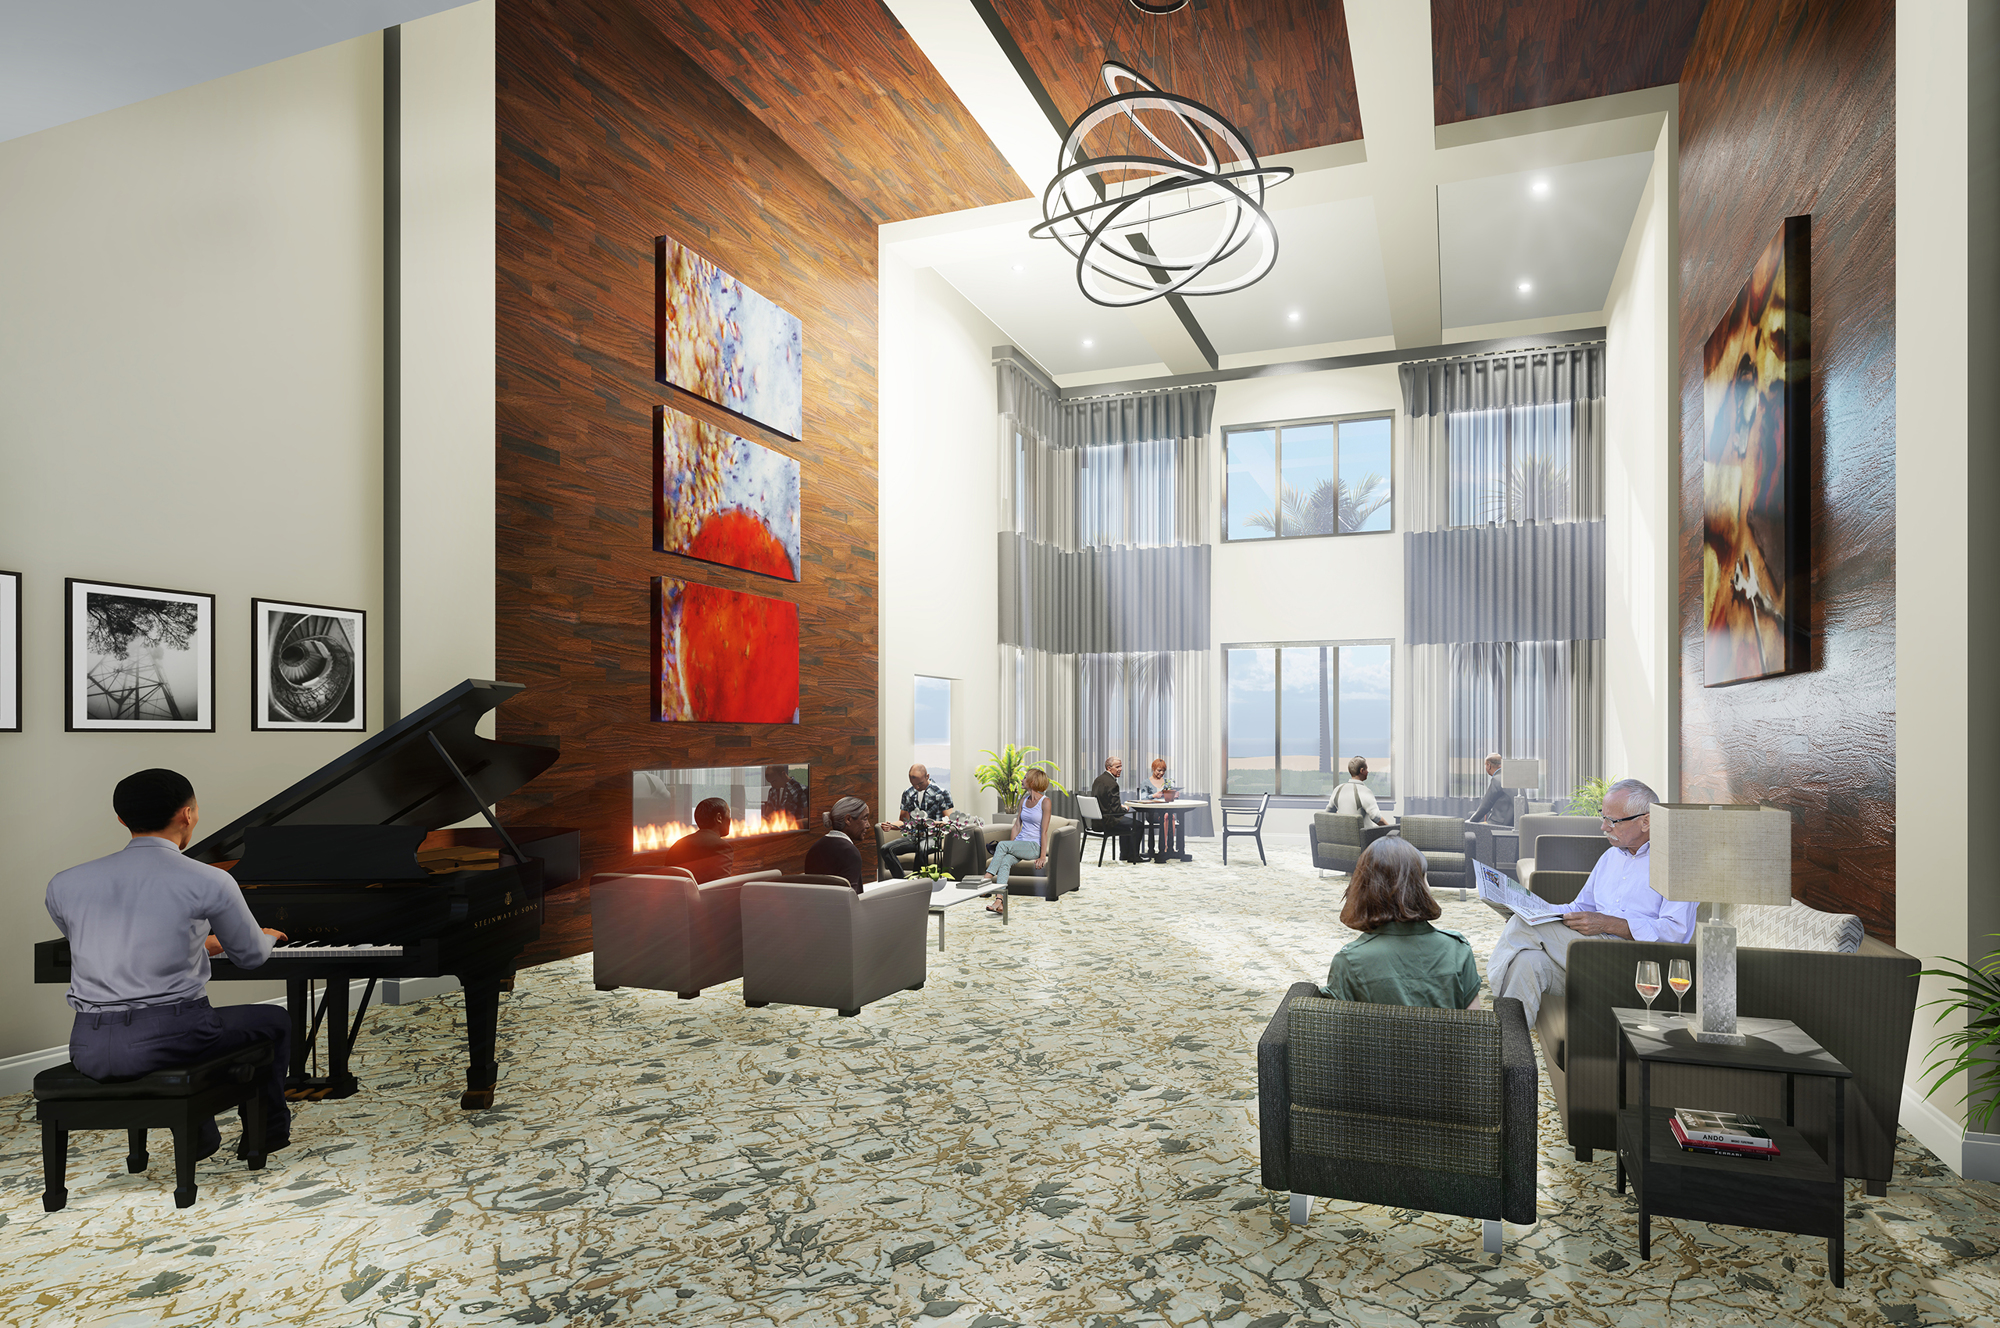 The living area. Legend Senior Living is developing the project.